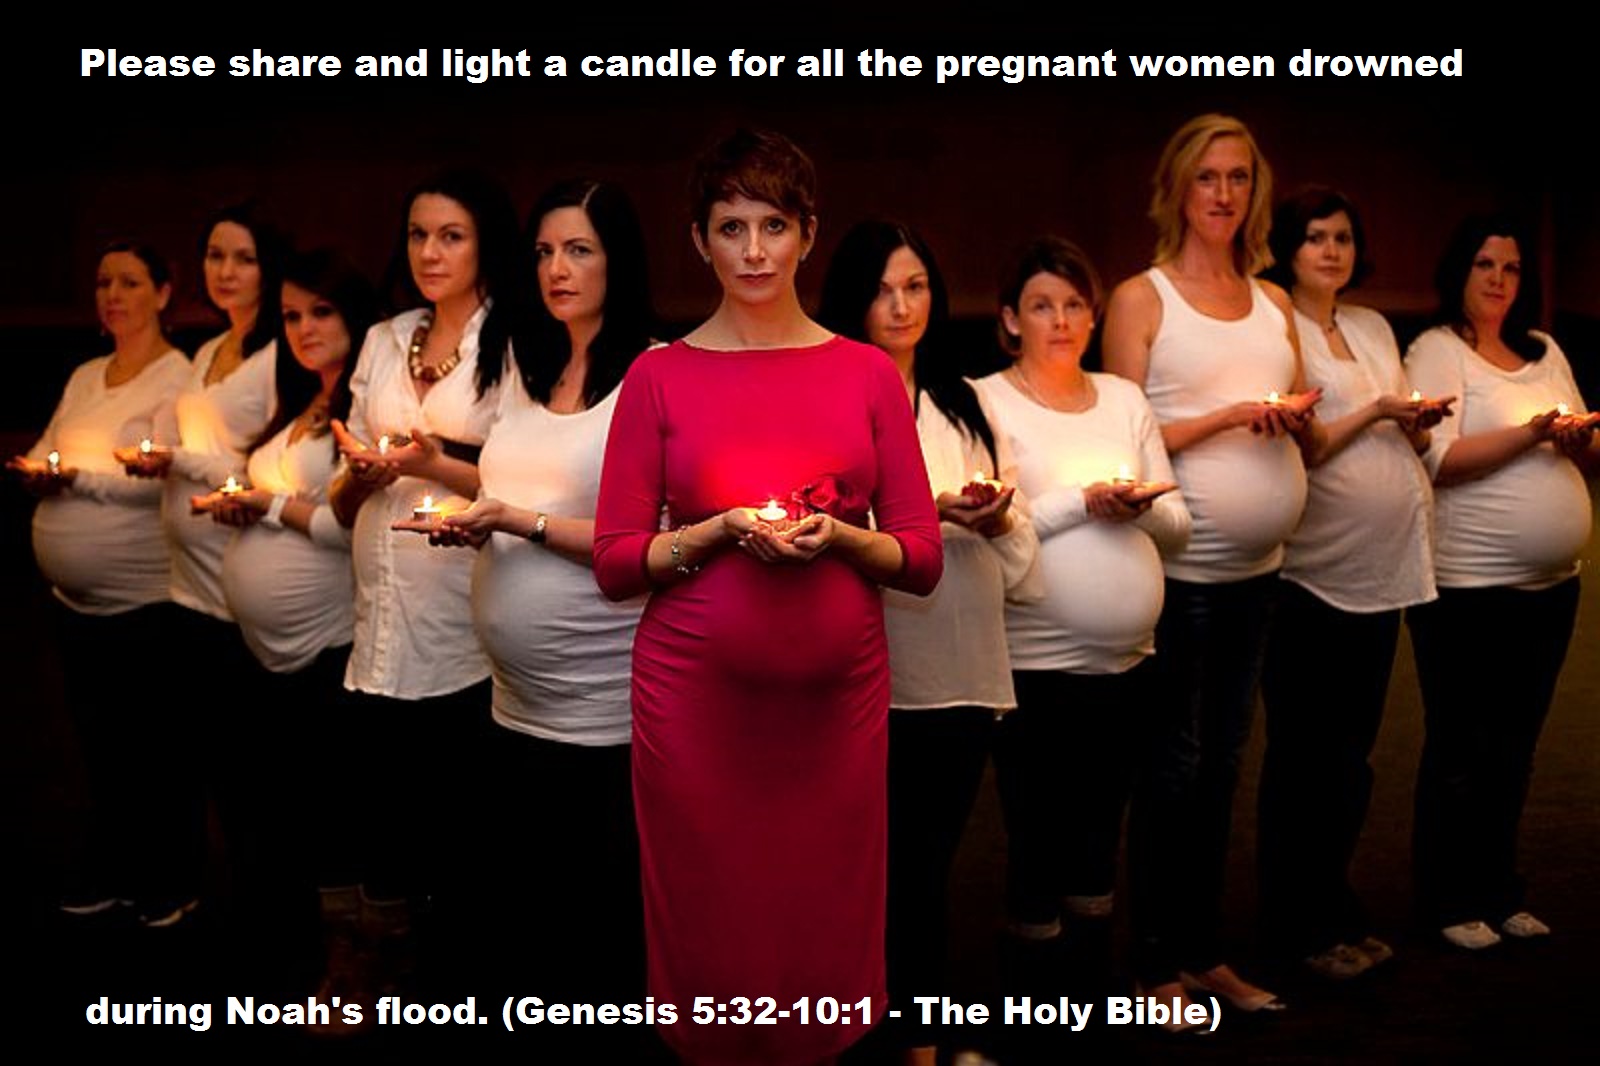 Please share and light a candle for all the pregnant women drowned during Noah's flood. (Genesis 5:32-10:1 - The Holy Bible)